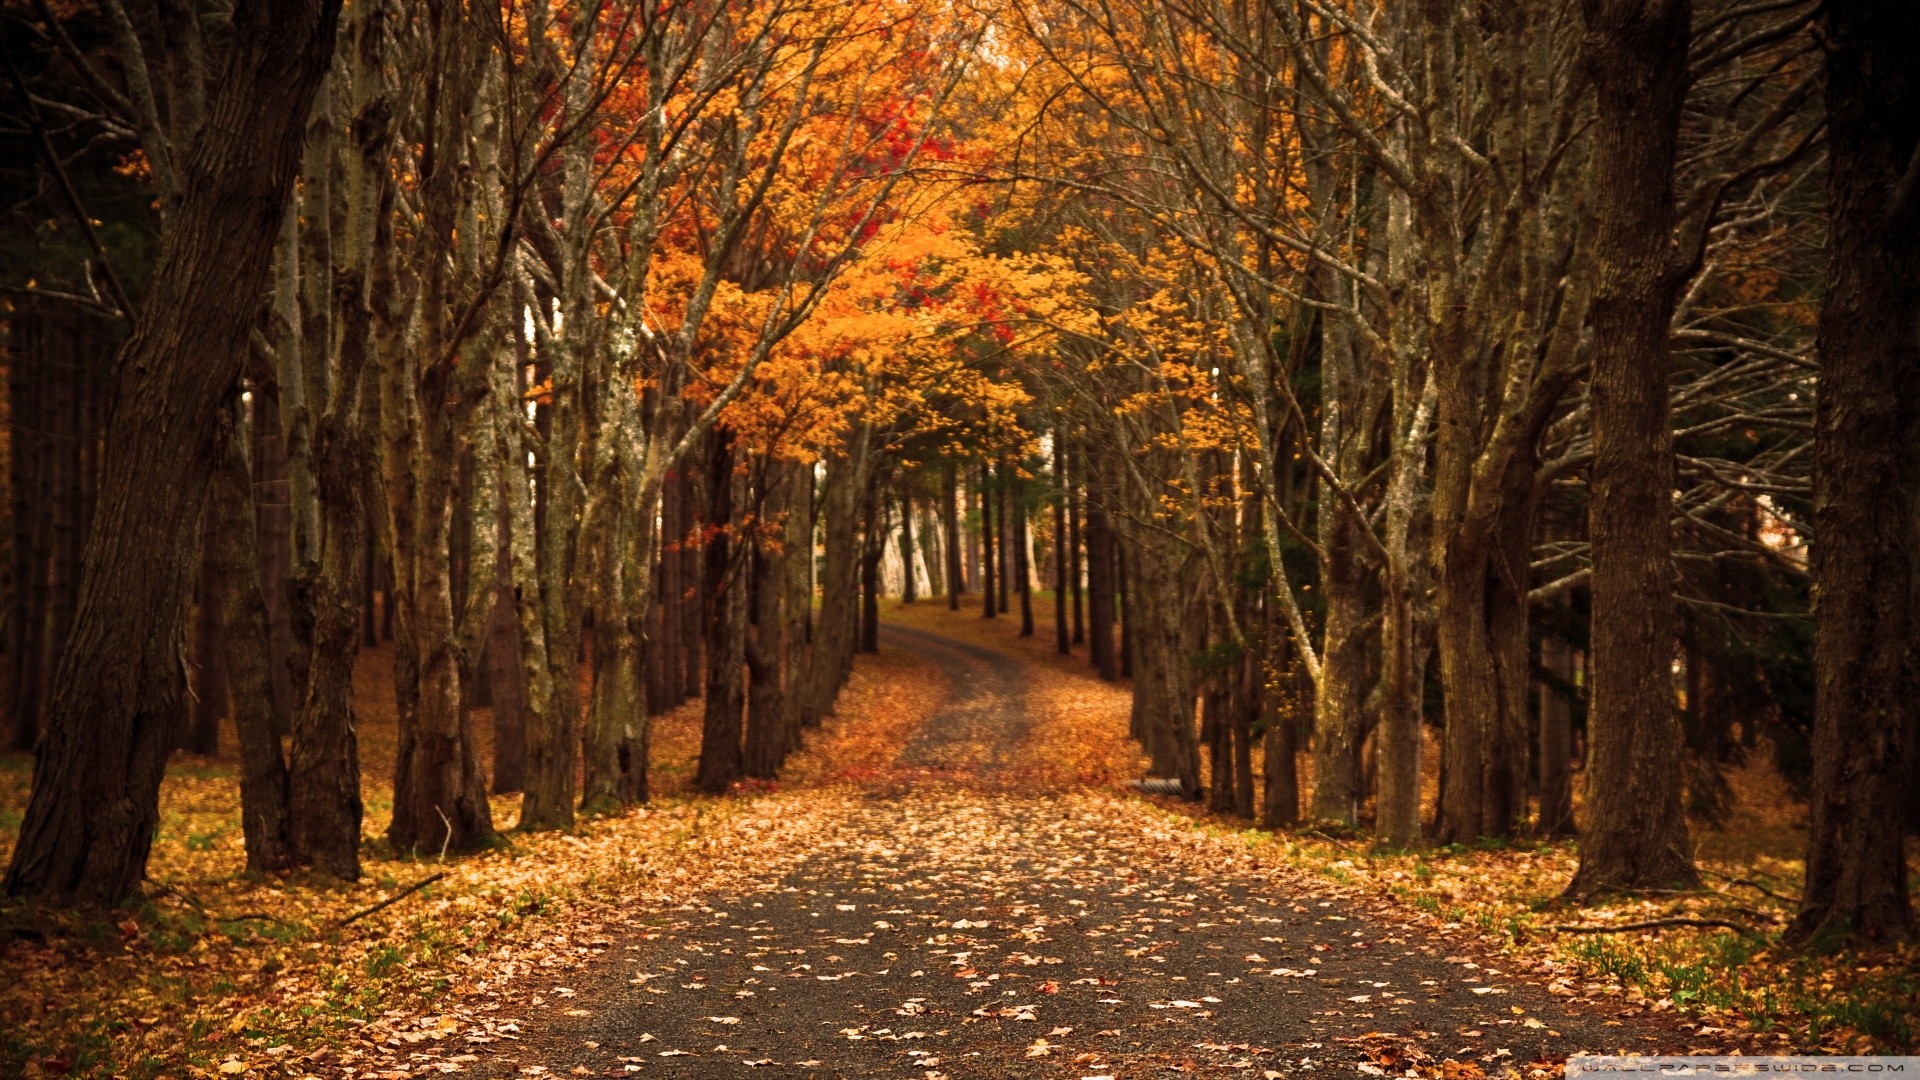 General 1920x1080 nature road fall leaves path trees orange forest watermarked